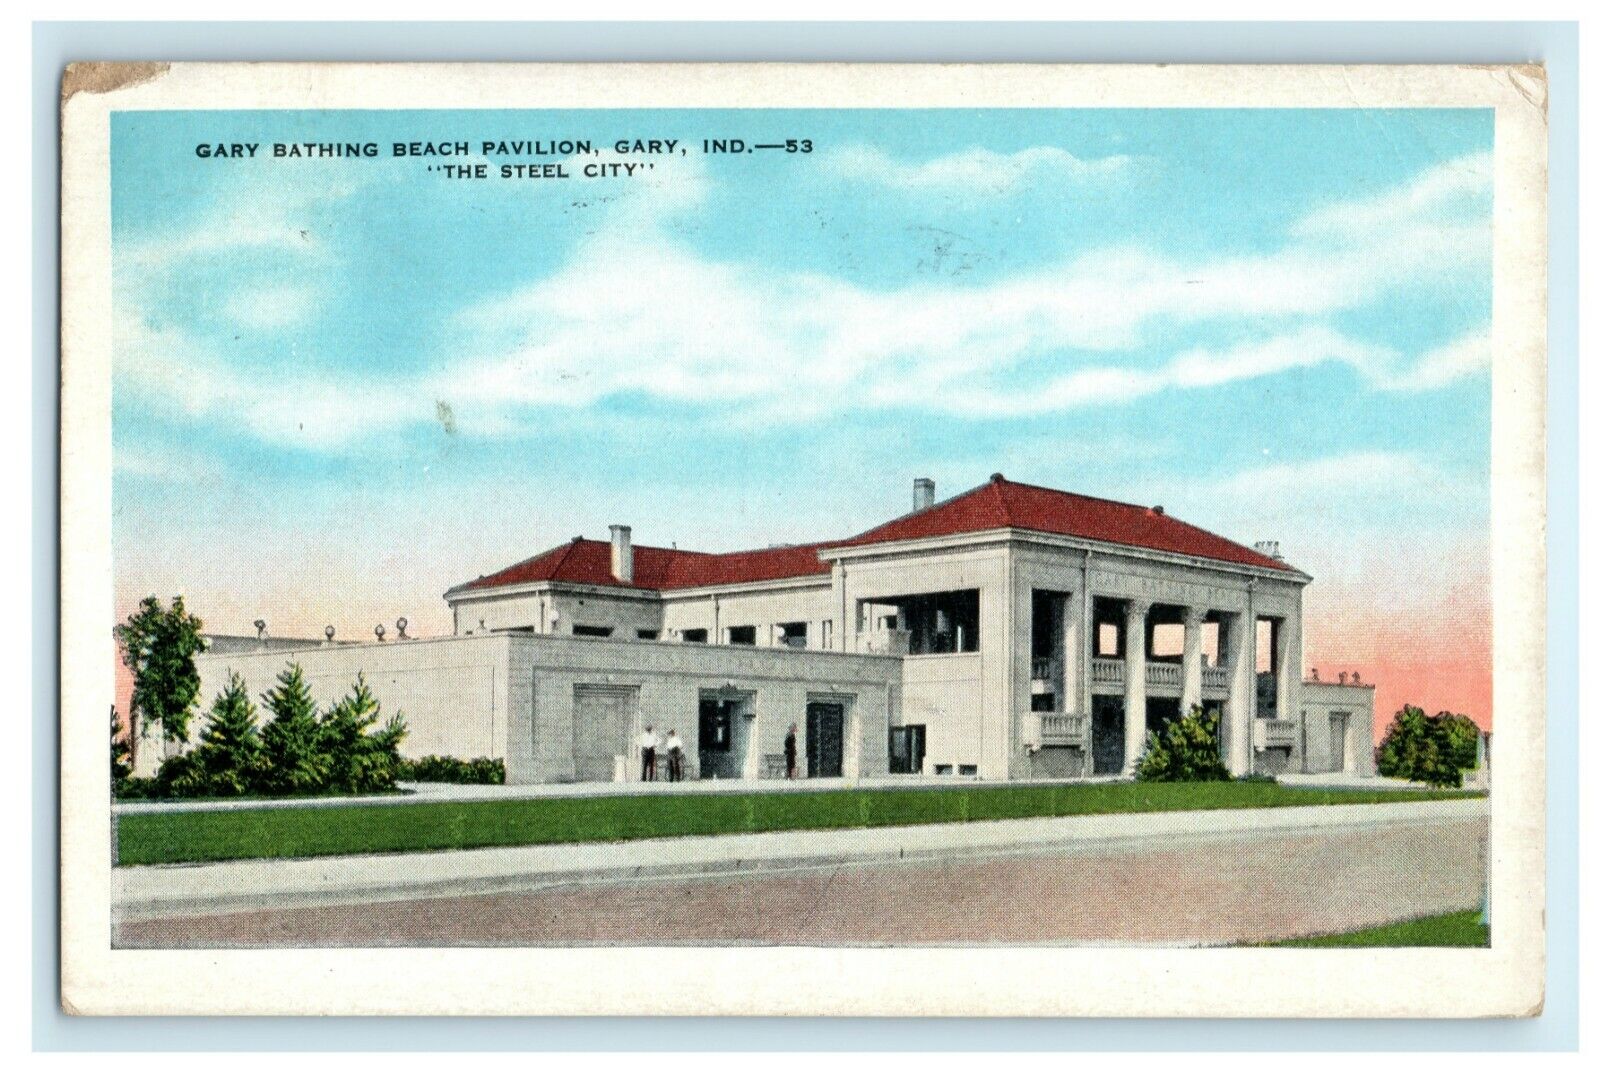 1936 Gary Bathing Beach Pavilion Indiana IN Steel City Posted Postcard